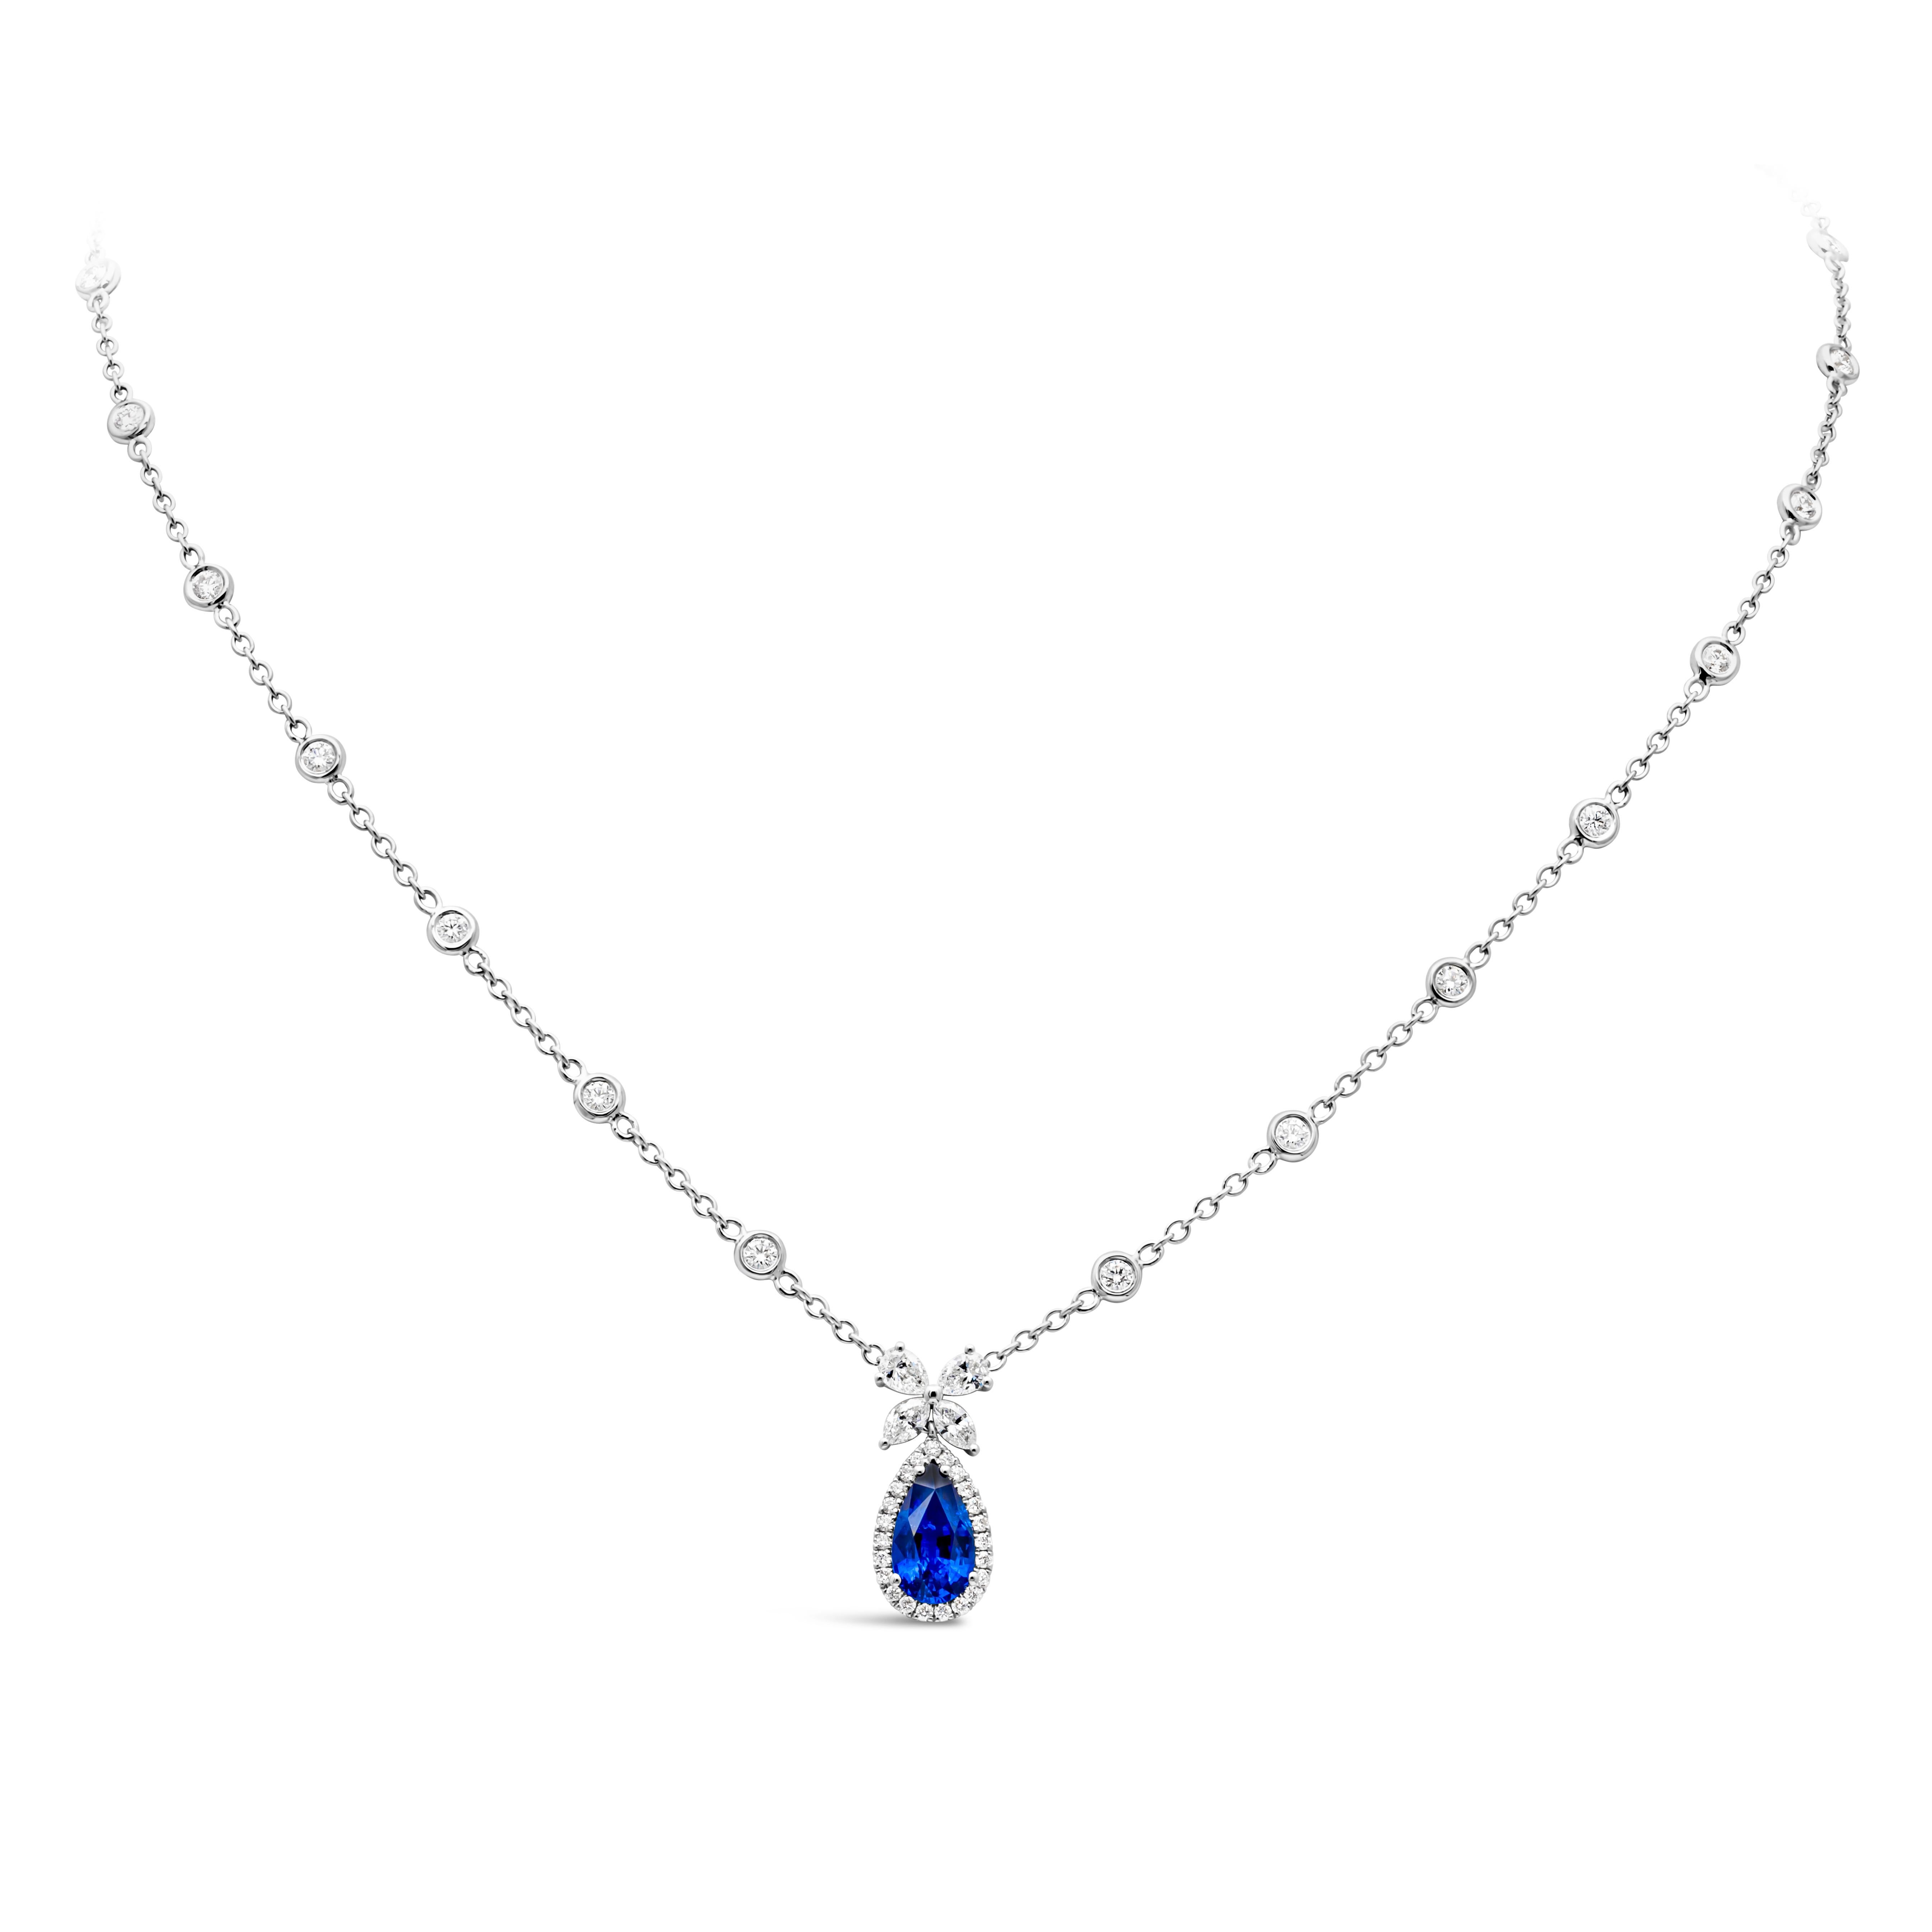 A classy and simple pendant necklace showcasing a pear shape color-rich blue sapphire weighing 1.54 carats total. Embellished by a row of round brilliant diamonds in a halo design, weighing 1.08 carats total. Suspended on two marquises and two pear